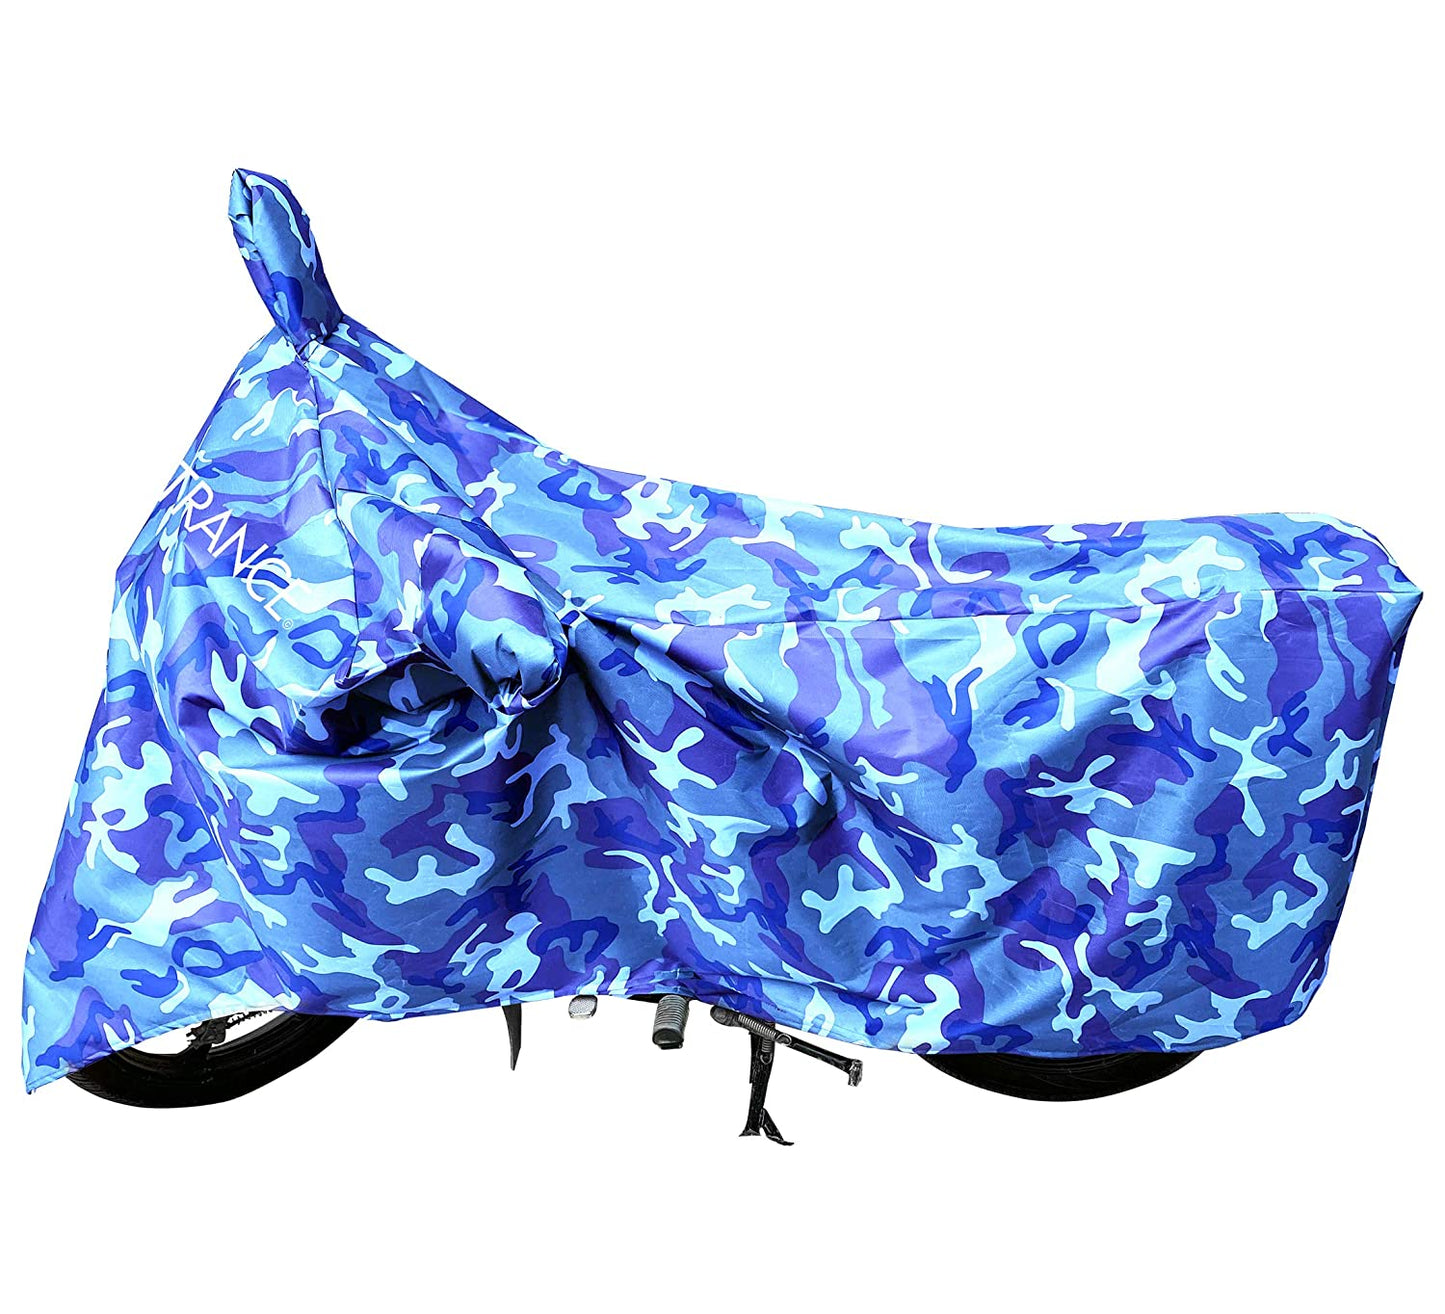 MotoTrance Jungle Bike Body Covers For OkinawaÂ  i-Praise 2019 - Interlock-Stitched Waterproof and Heat Resistant with Mirror Pockets